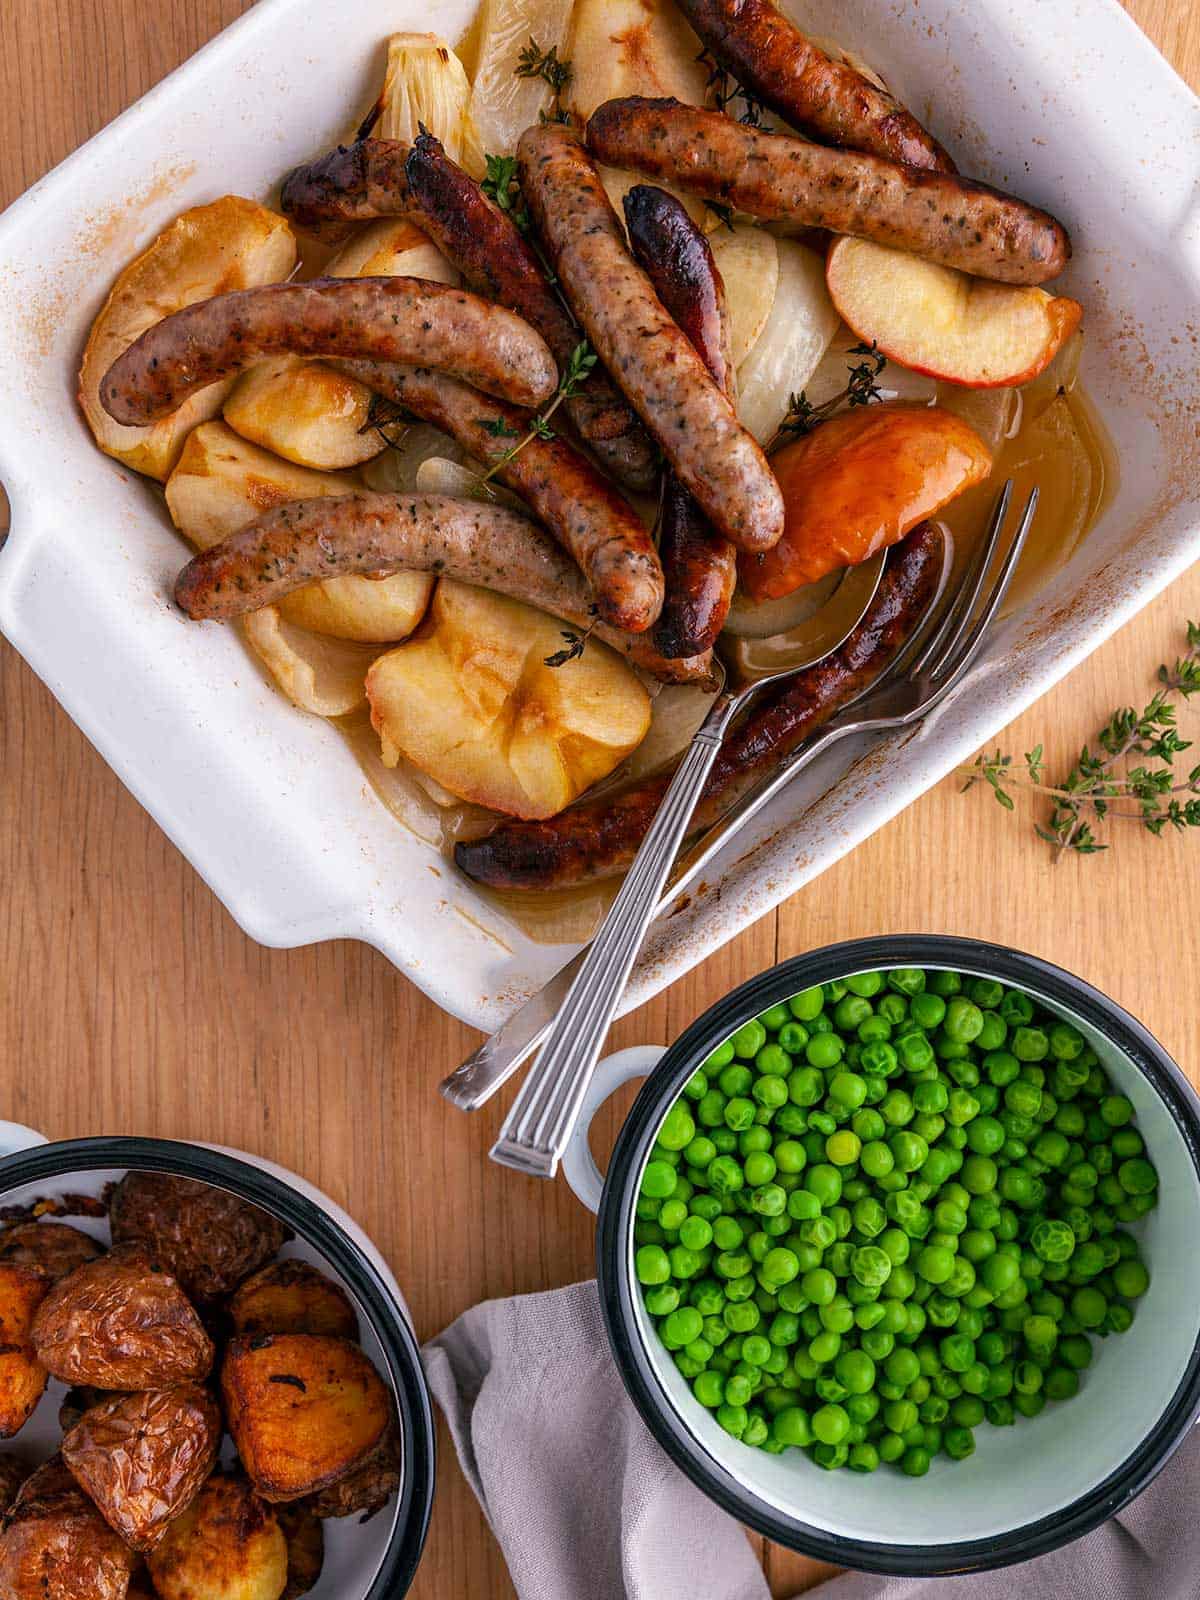 A white casserole dish full of sausages, onions and apples on a wooden table with a dish of garden peas and a dish of potatoes.